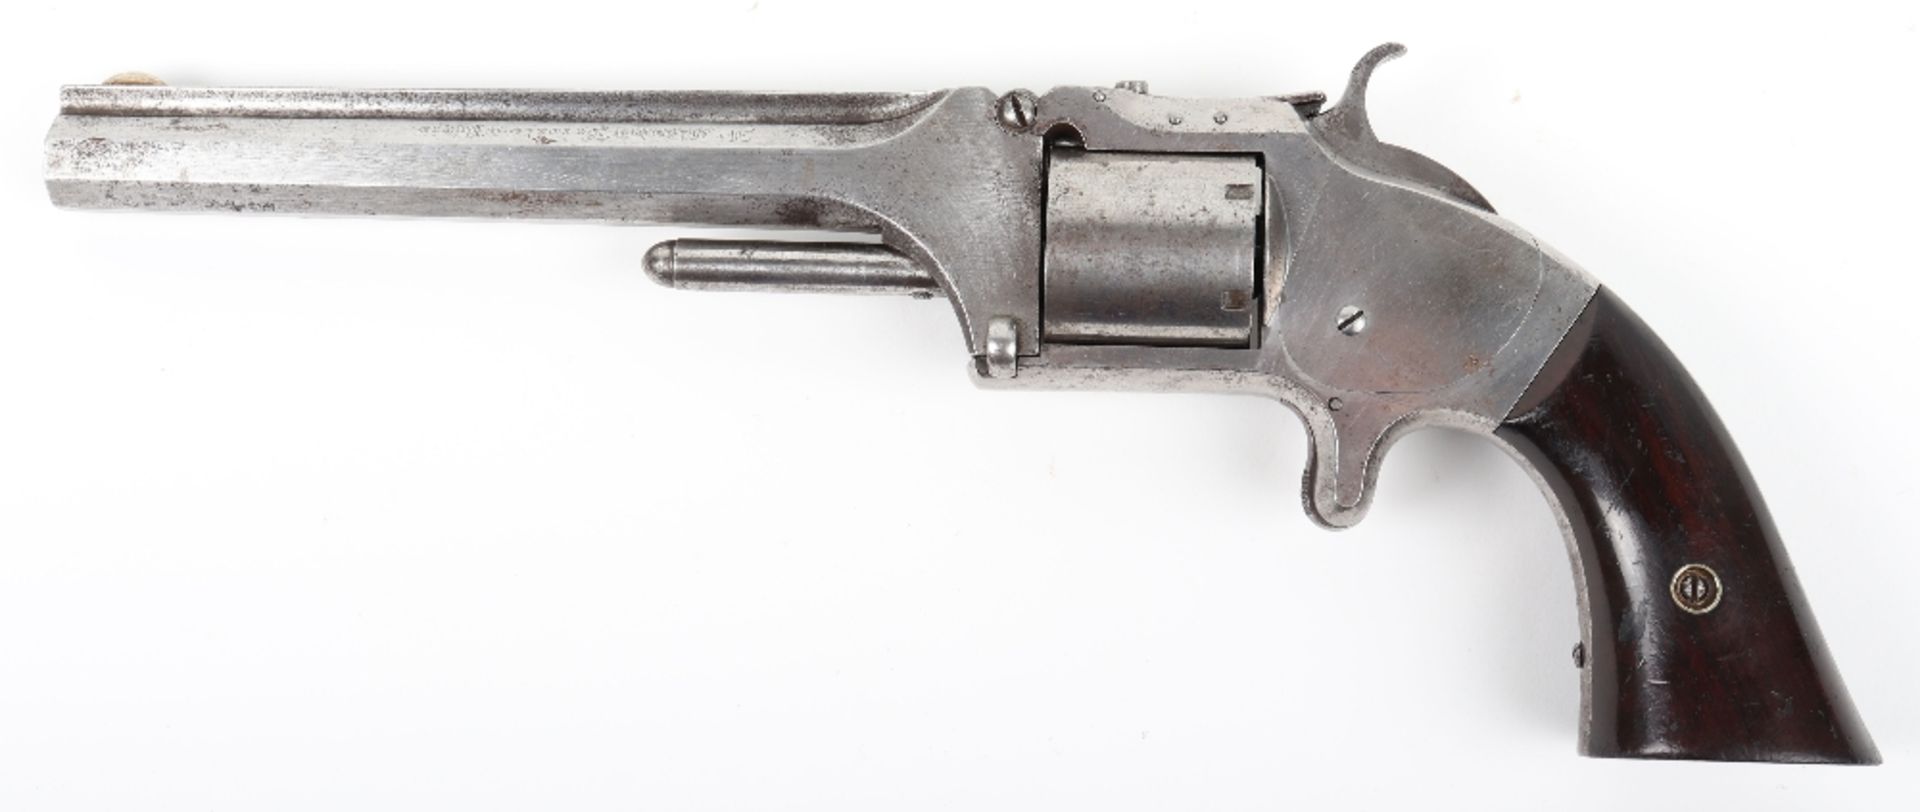 6 Shot .32” Rimfire Smith and Wesson Single Action Revolver No. 62099 Retailed in France - Image 6 of 9